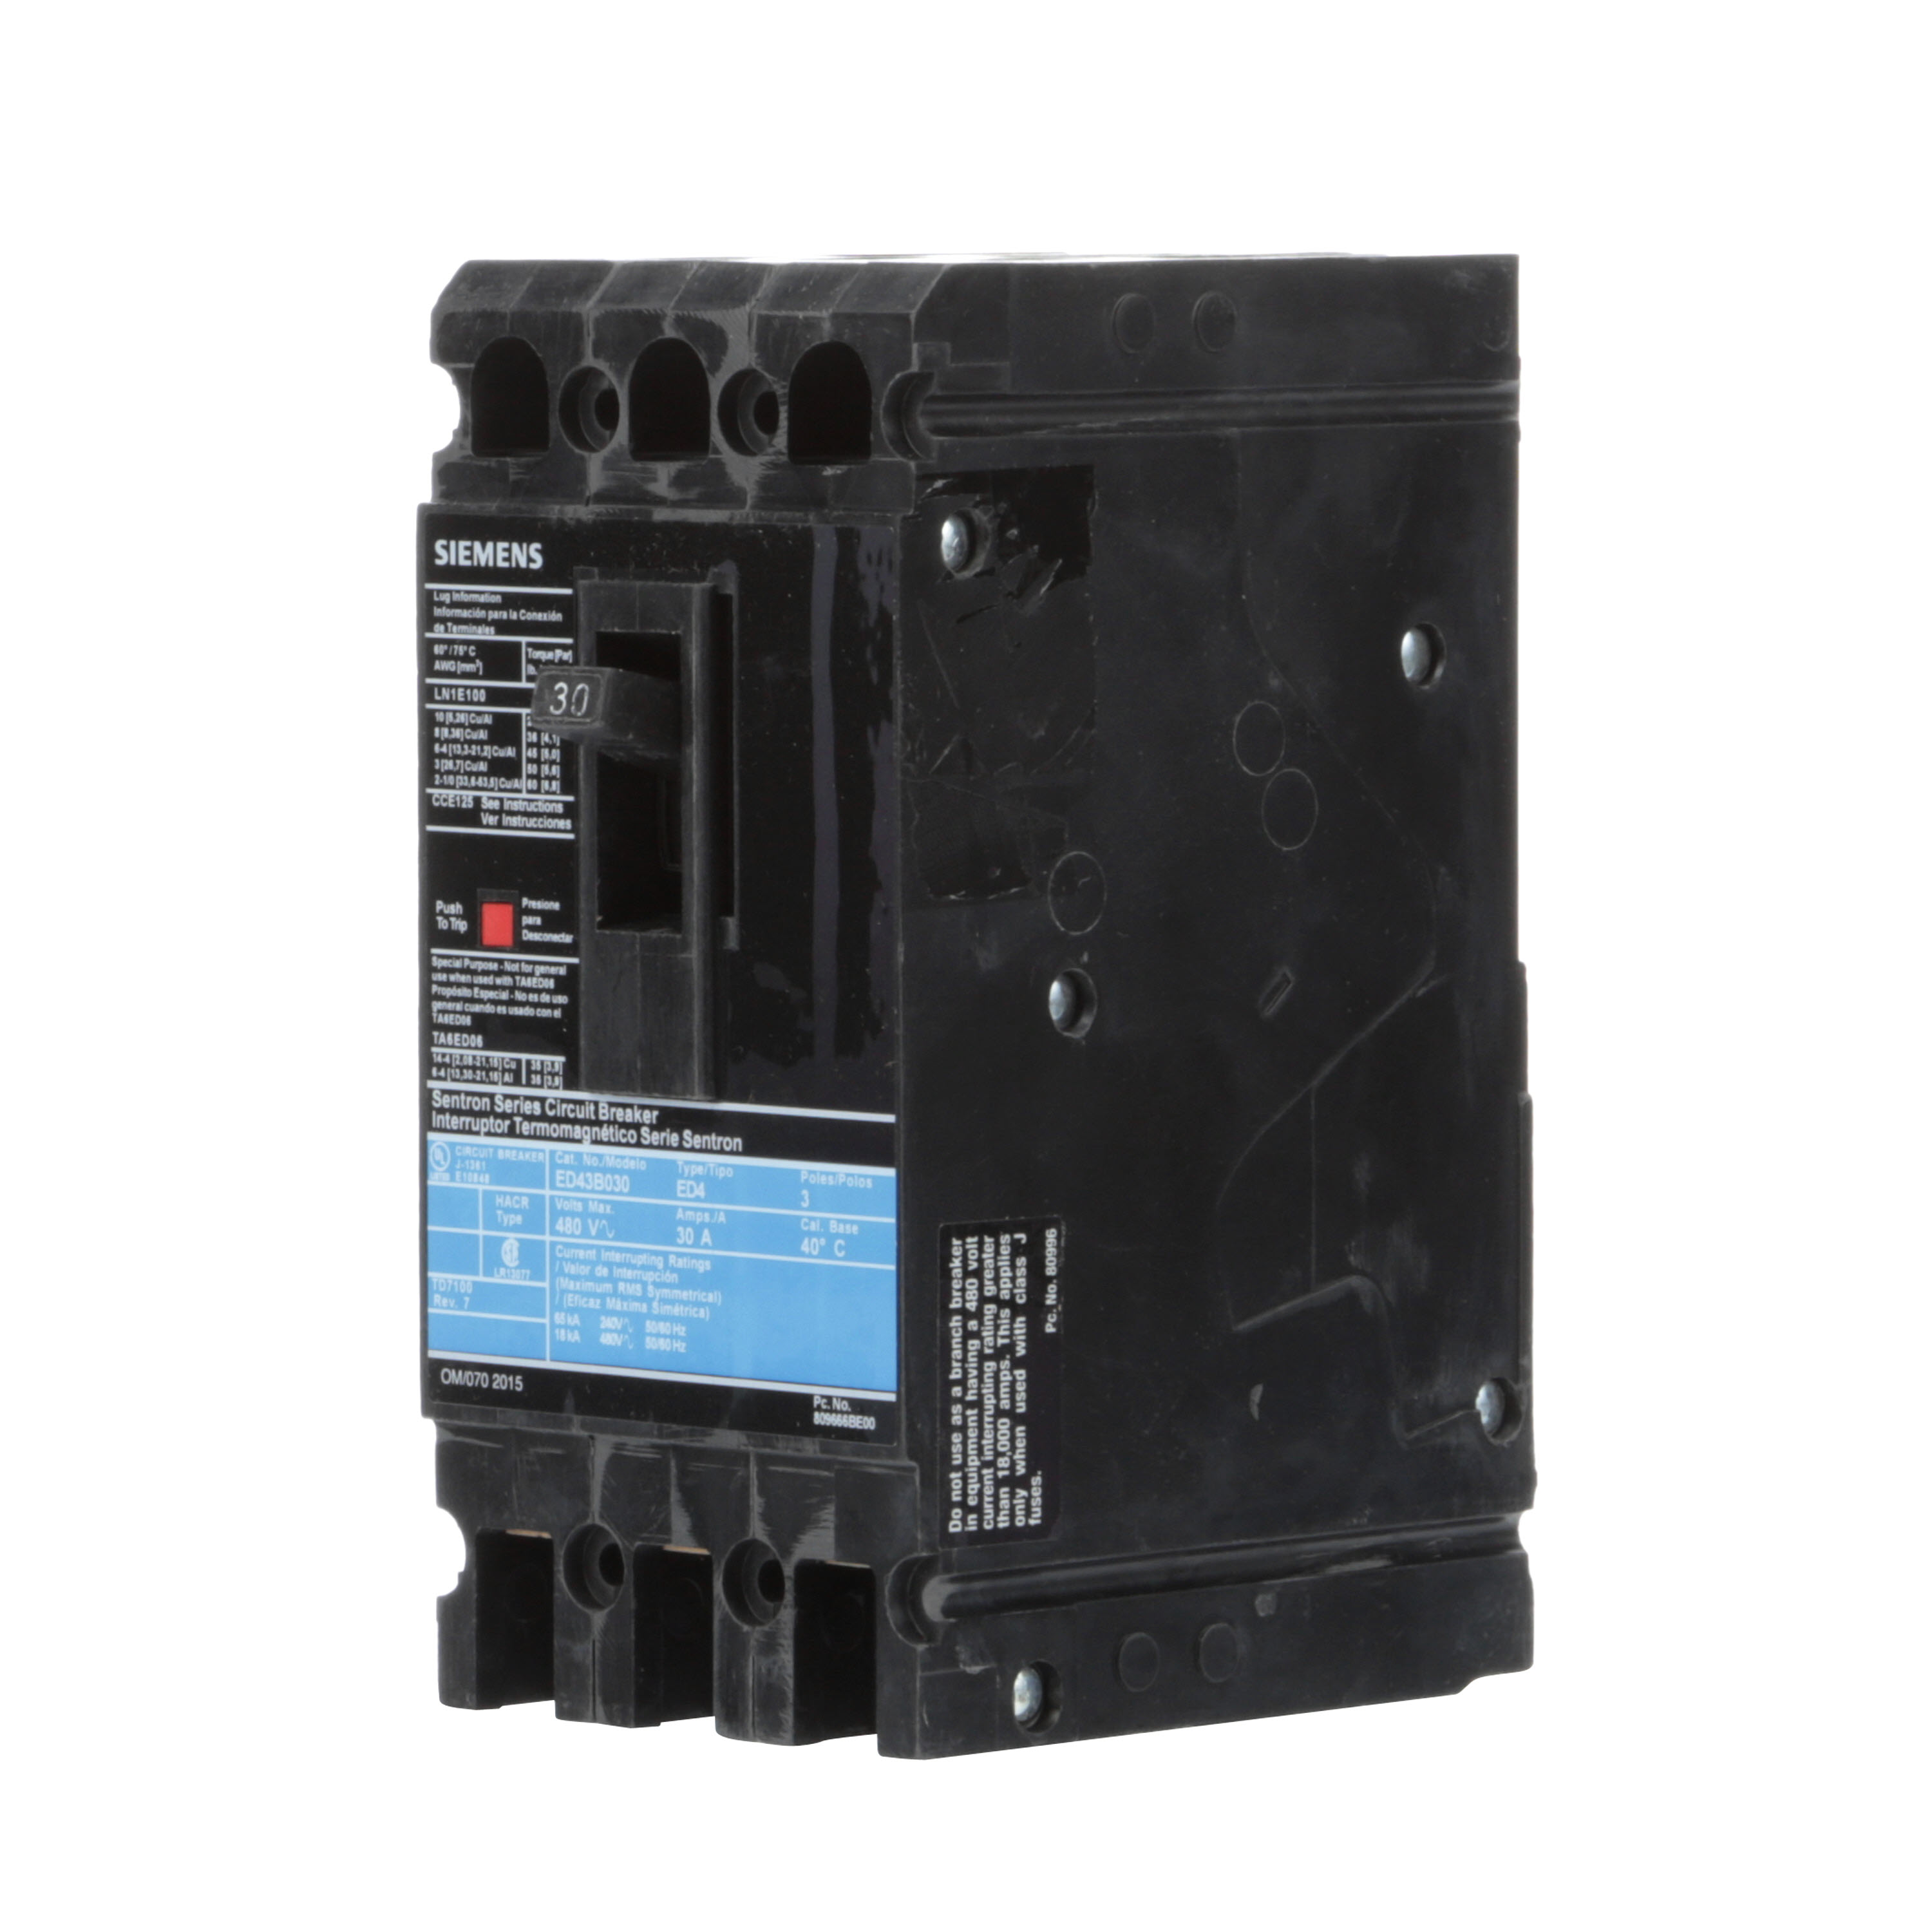 SIEMENS LOW VOLTAGE SENTRON MOLDED CASE CIRCUIT BREAKER WITH THERMAL - MAGNETICTRIP UNIT. STANDARD 40 DEG C BREAKER ED FRAME WITH STANDARD BREAKING CAPACITY. 30A 3-POLE (18KAIC AT 480V). NON-INTERCHANGEABLE TRIP UNIT. SPECIAL FEATURES LINE AND LOAD SIDE LUGS (LN1E100) WIRE RANGE 10 - 1/0AWG (CU/AL). DIMENSIONS (W x Hx D) IN 3.00 x 6.4 x 3.92.